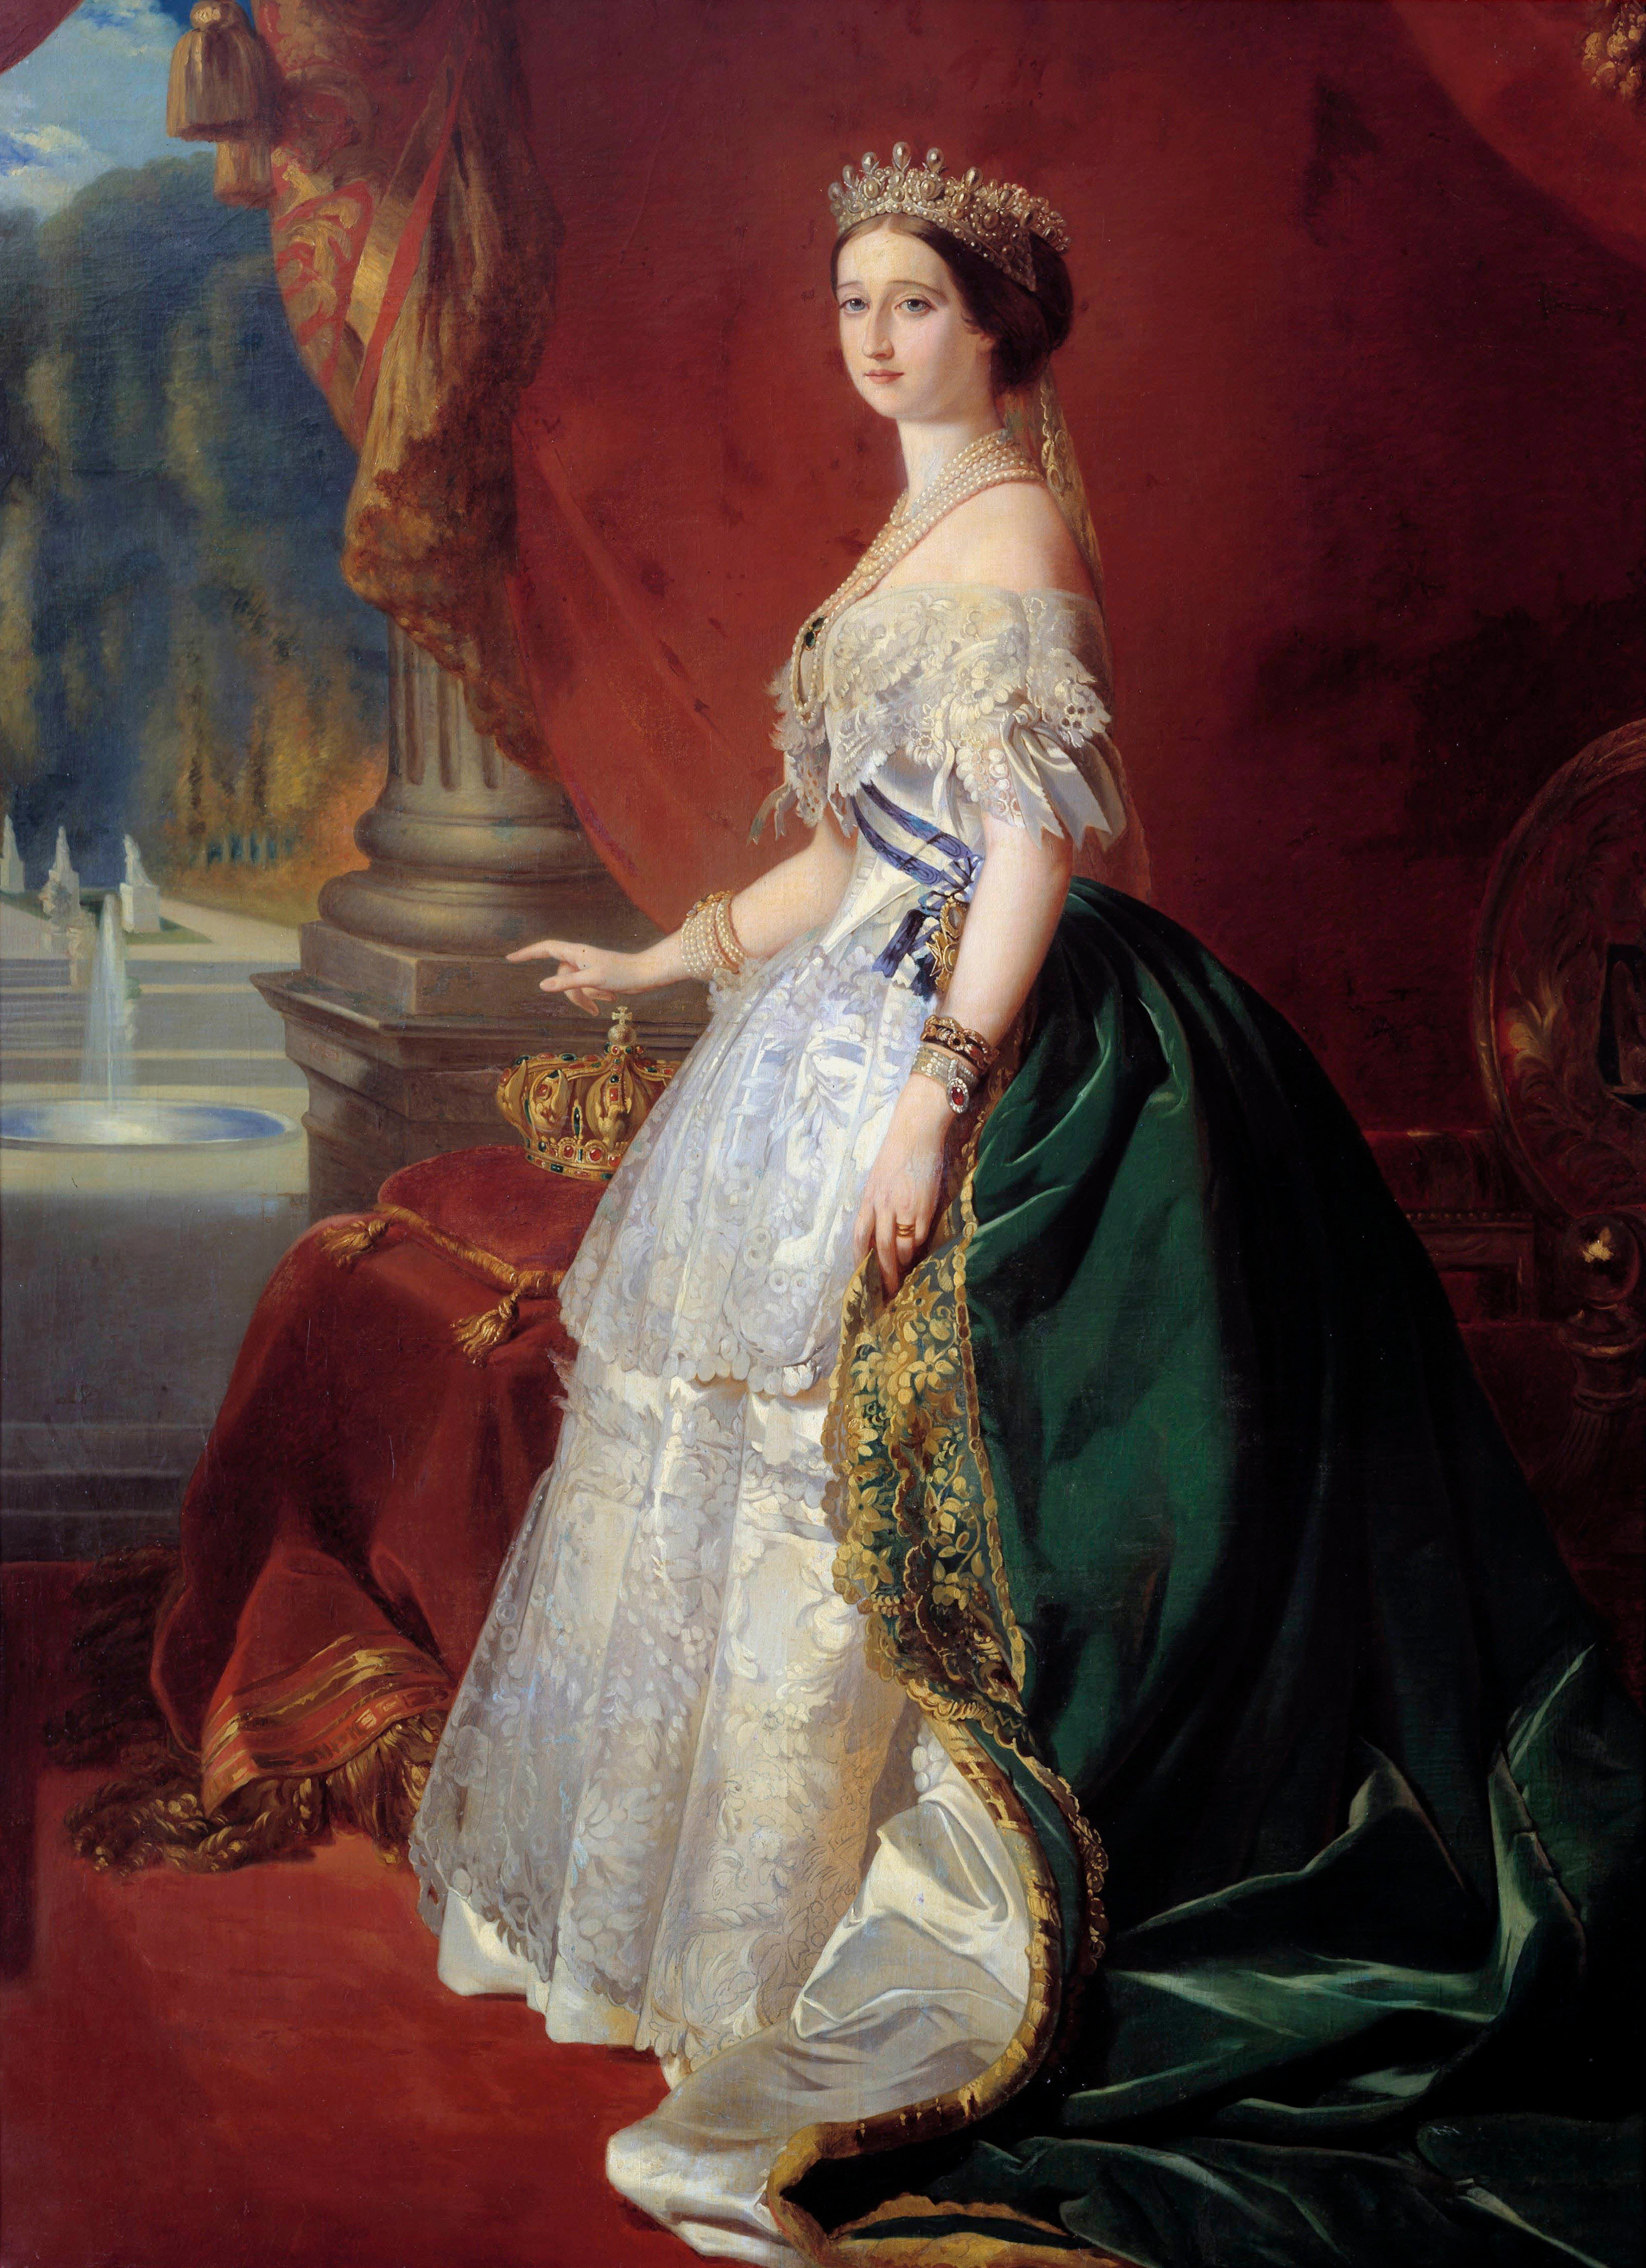 Impress of an empress: The influence of Eugénie on luxury style is still  felt today, The Independent